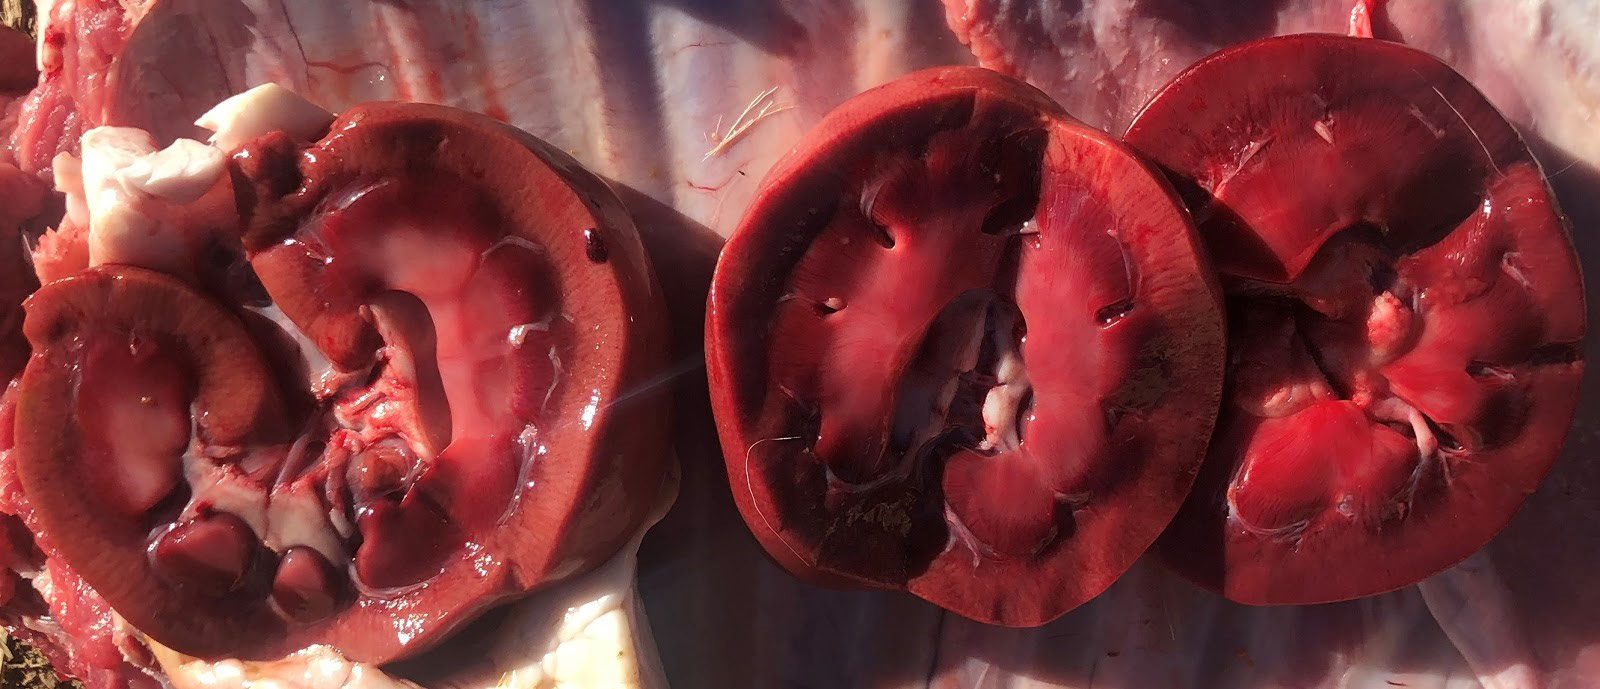 Normal kidney on left with two abnormal kidneys from goats with pulpy kidney.